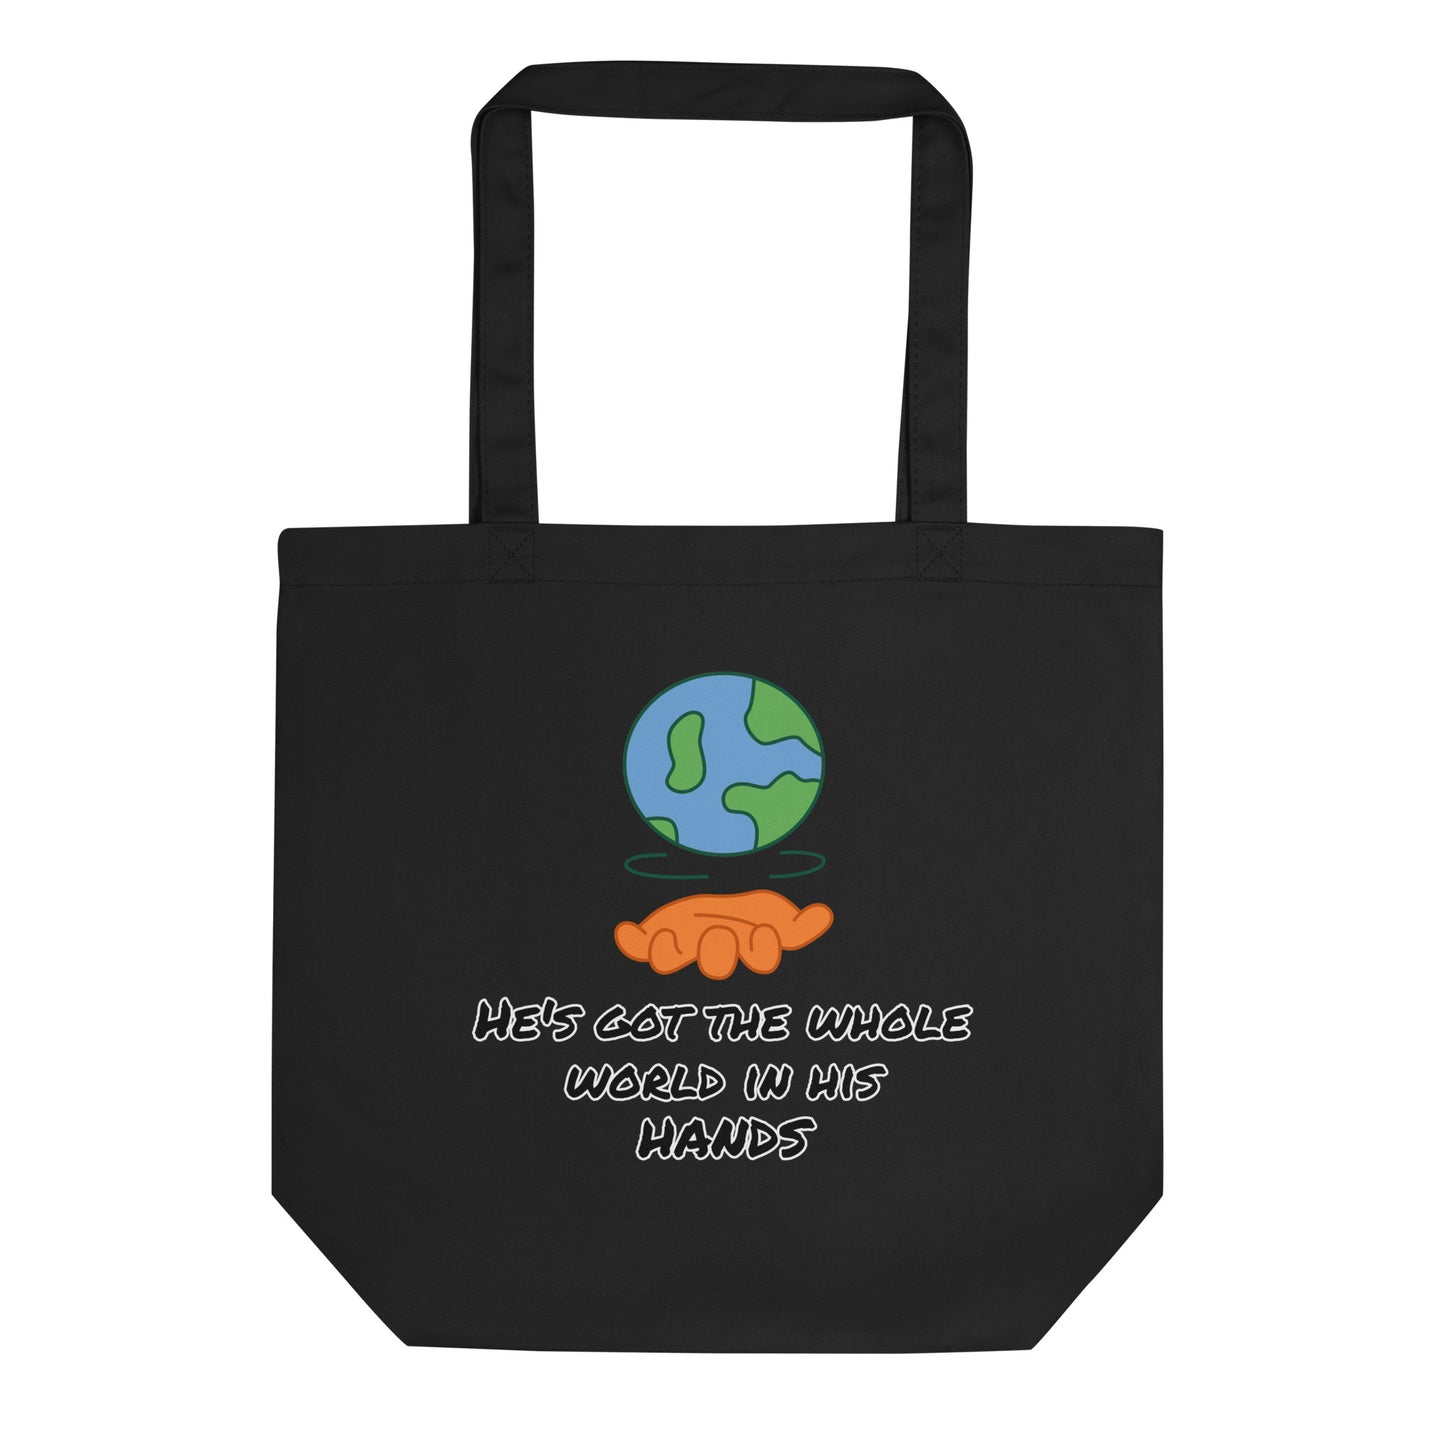 He's Got The Whole World In His Hands Eco Tote Bag